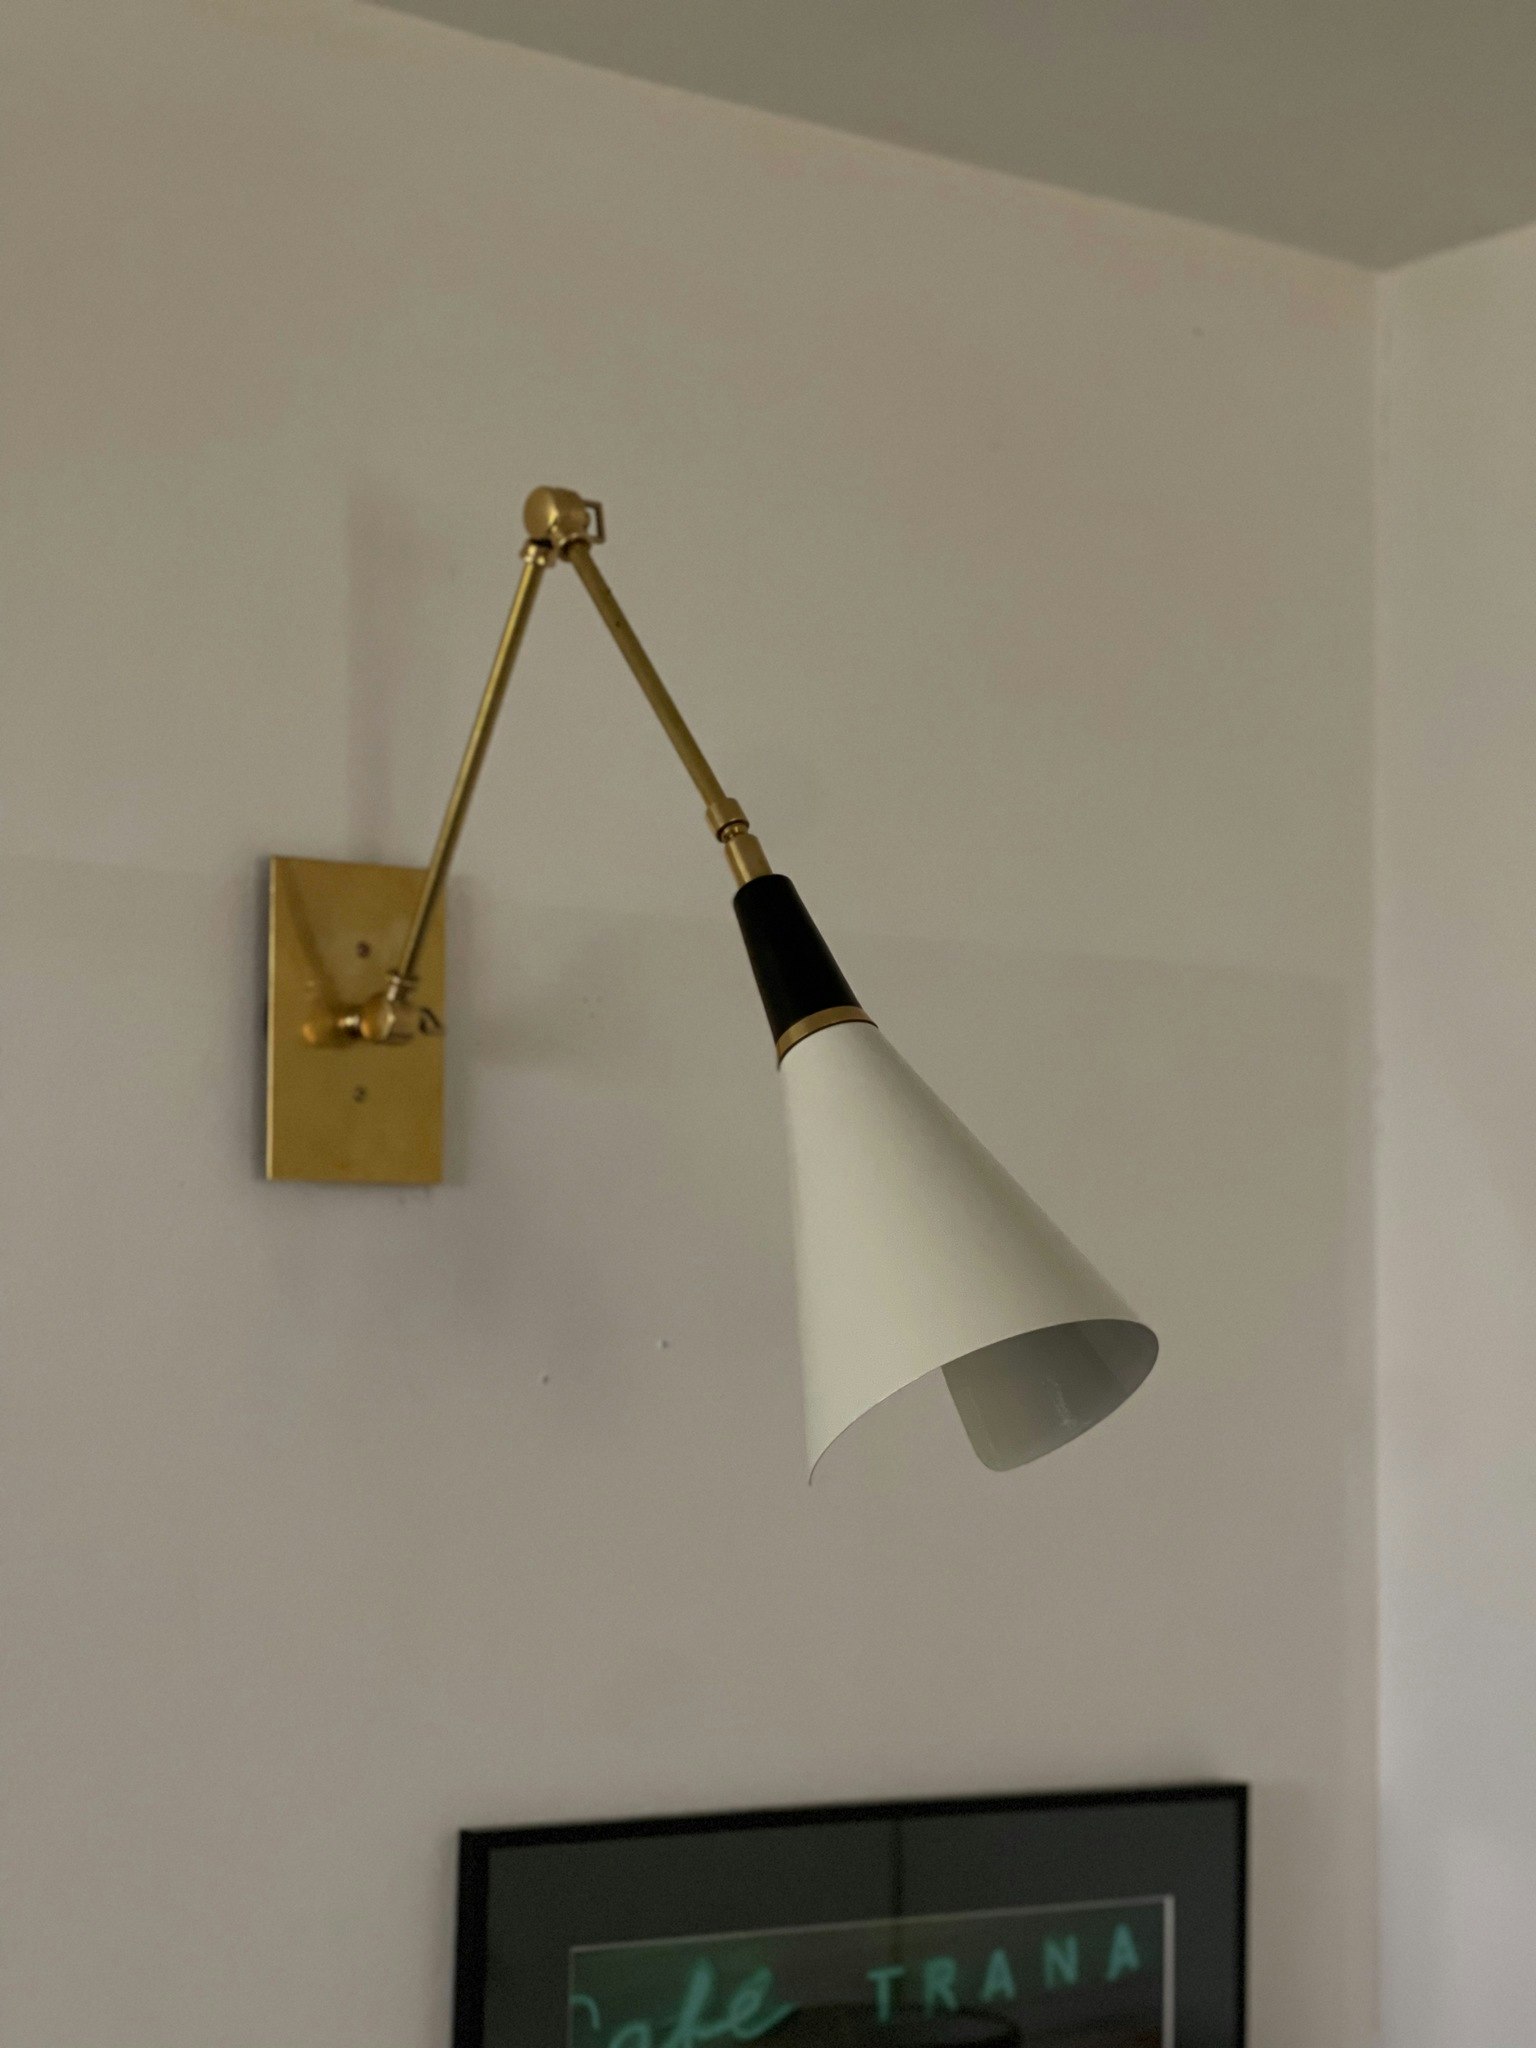 Pair of White Wall Lamps in the Style of Stilnovo.